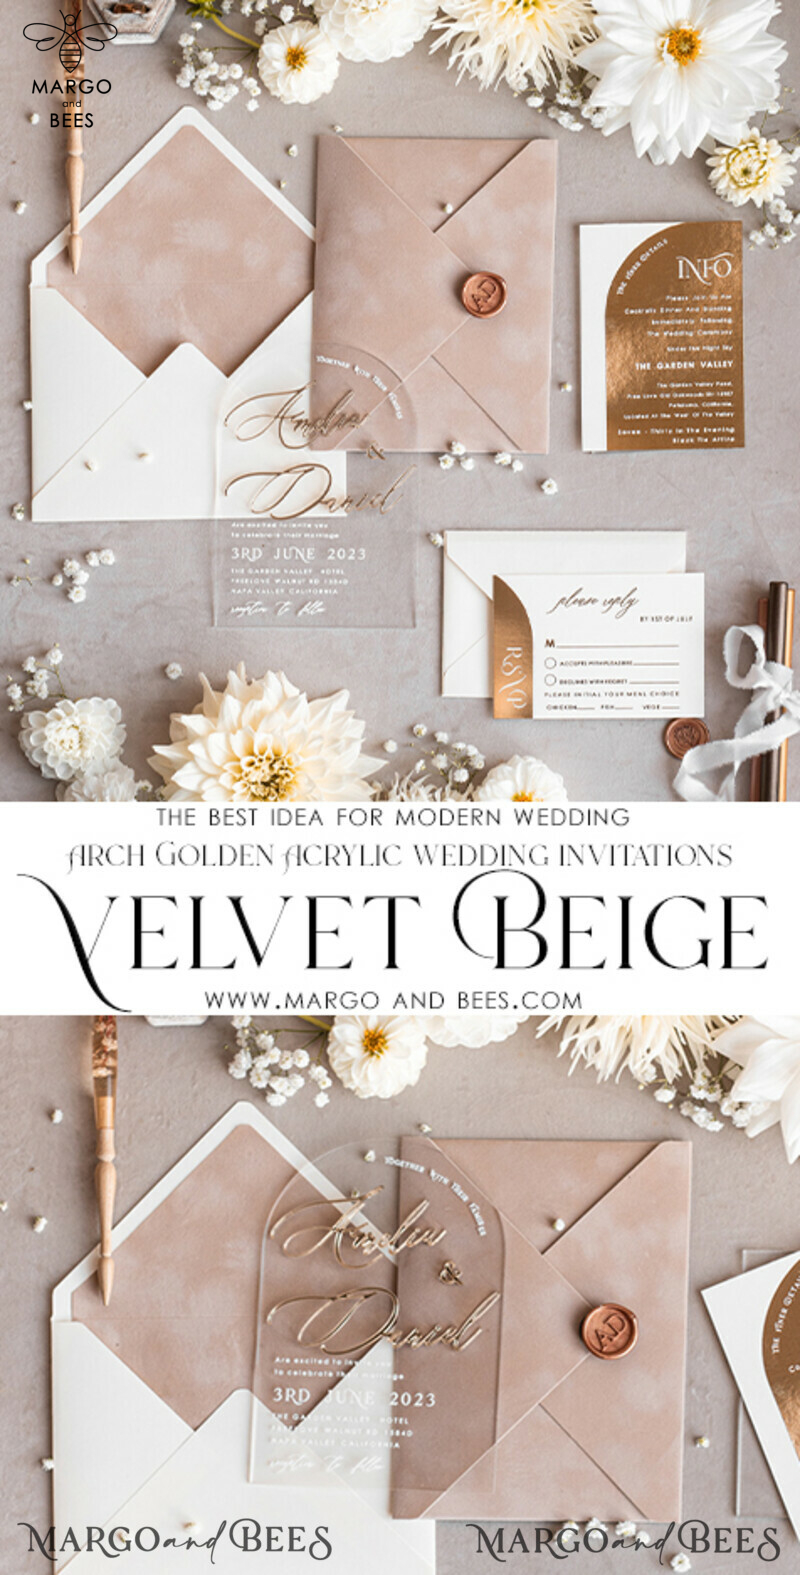 is it cheaper to make your own wedding invitations?-3